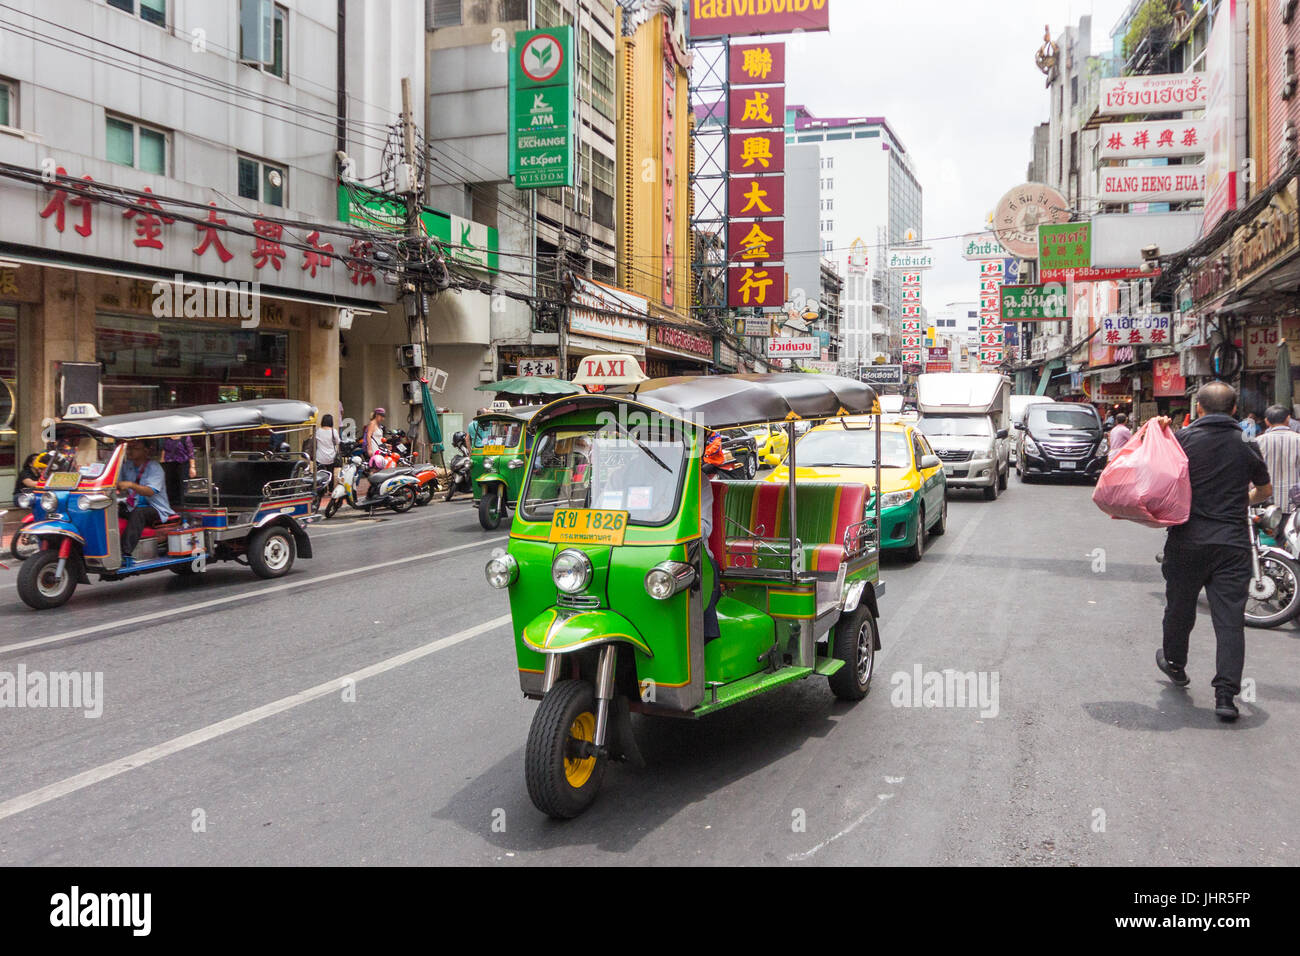 Tuk tuks and other traffic in a typical scene on Yaowarat road, Chinatown, Bangkok, Thailand Stock Photo